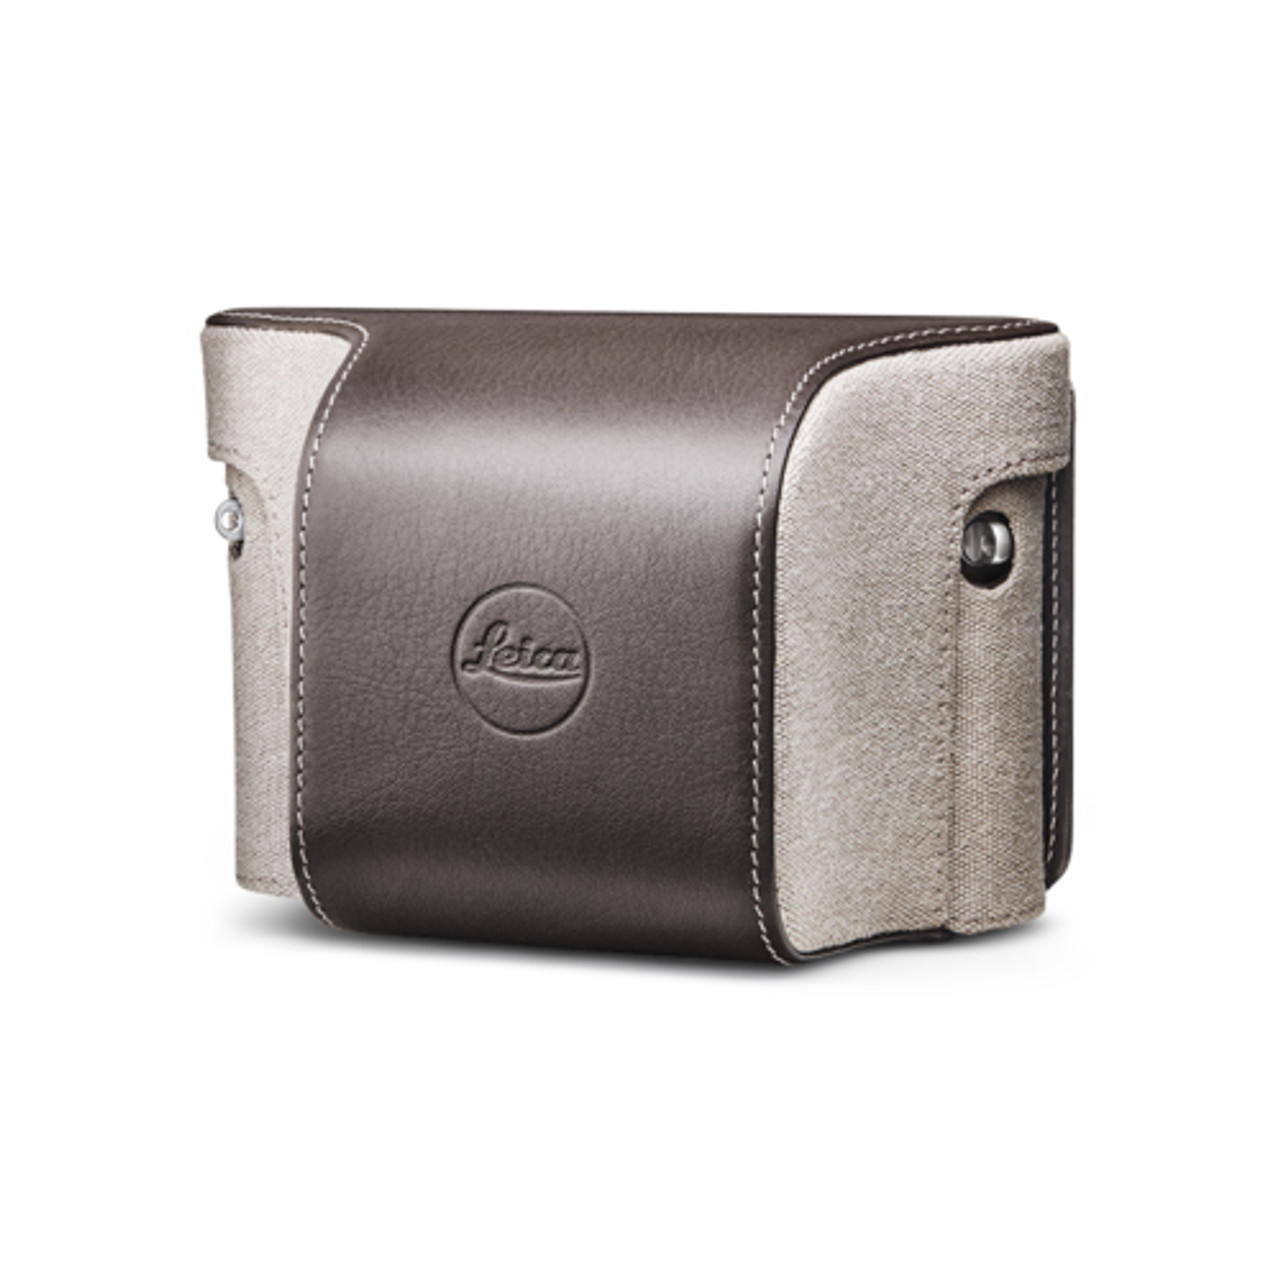 Leica X (Typ 113) Ever Ready Case Canvas Taupe